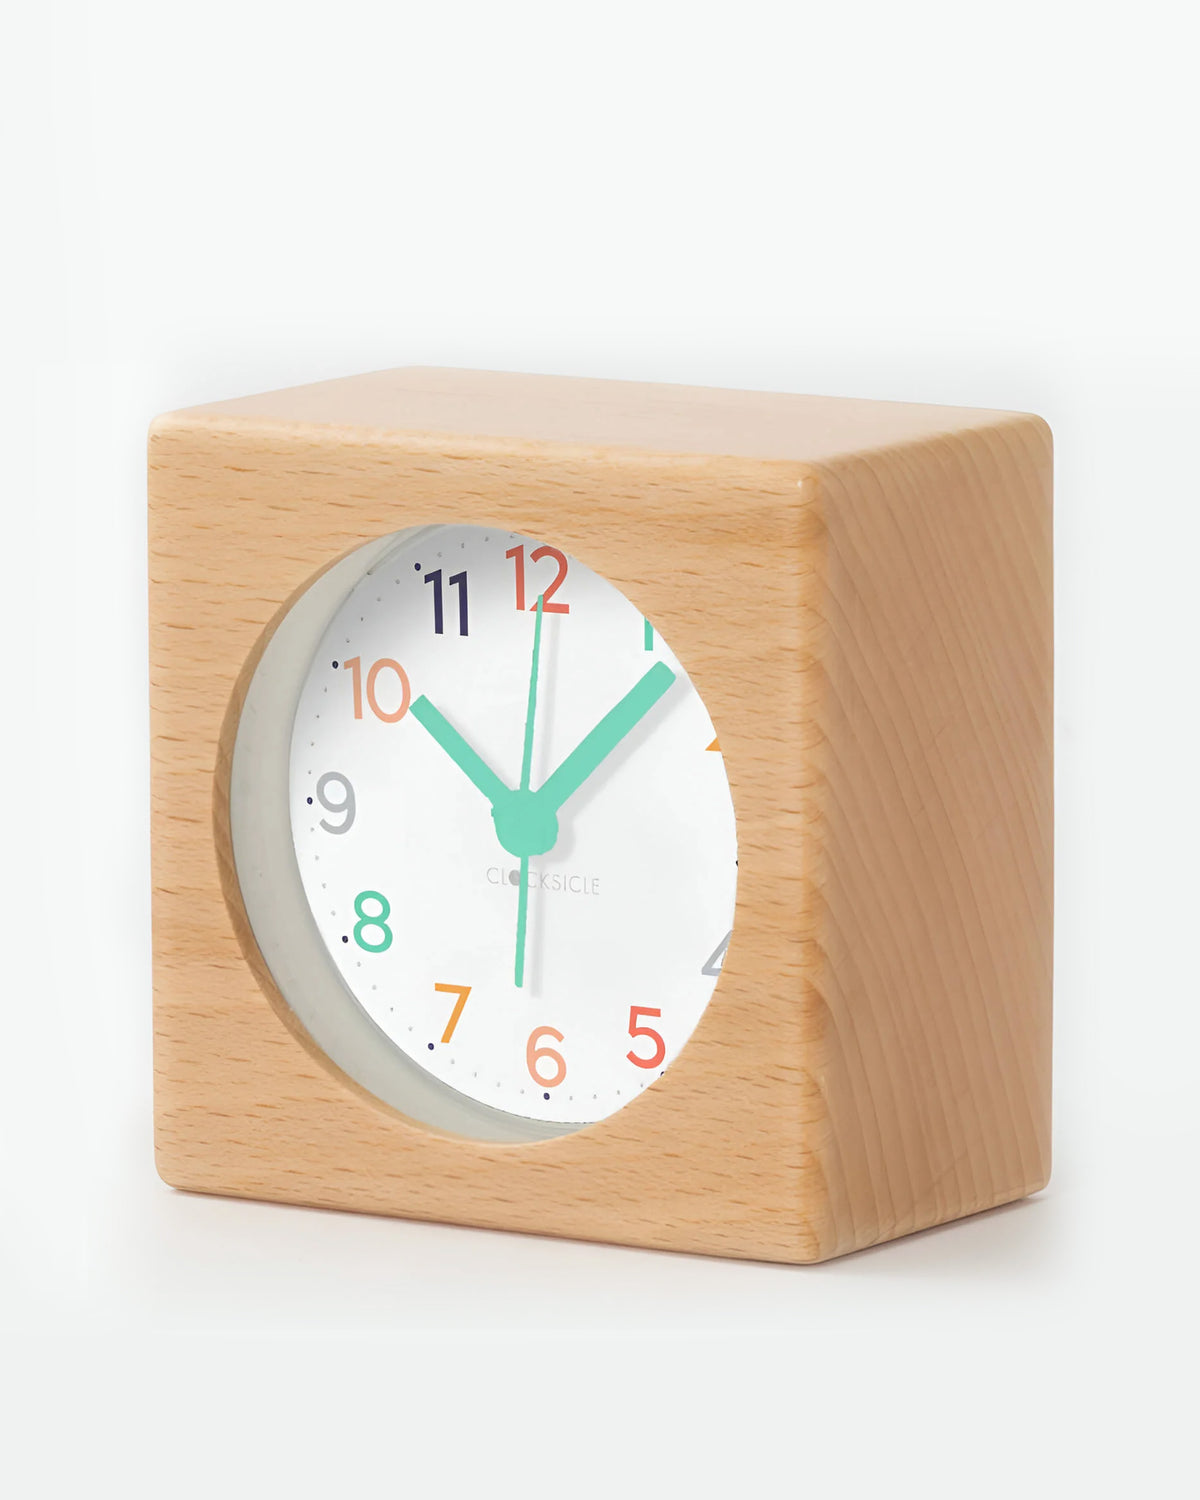 Add a cool pop of colour to your kid's rooms with these stylish alarm clocks. One of the best aspects of these clocks is that they are SILENT and do not tick, so they won't annoy you or keep you awake at night. 